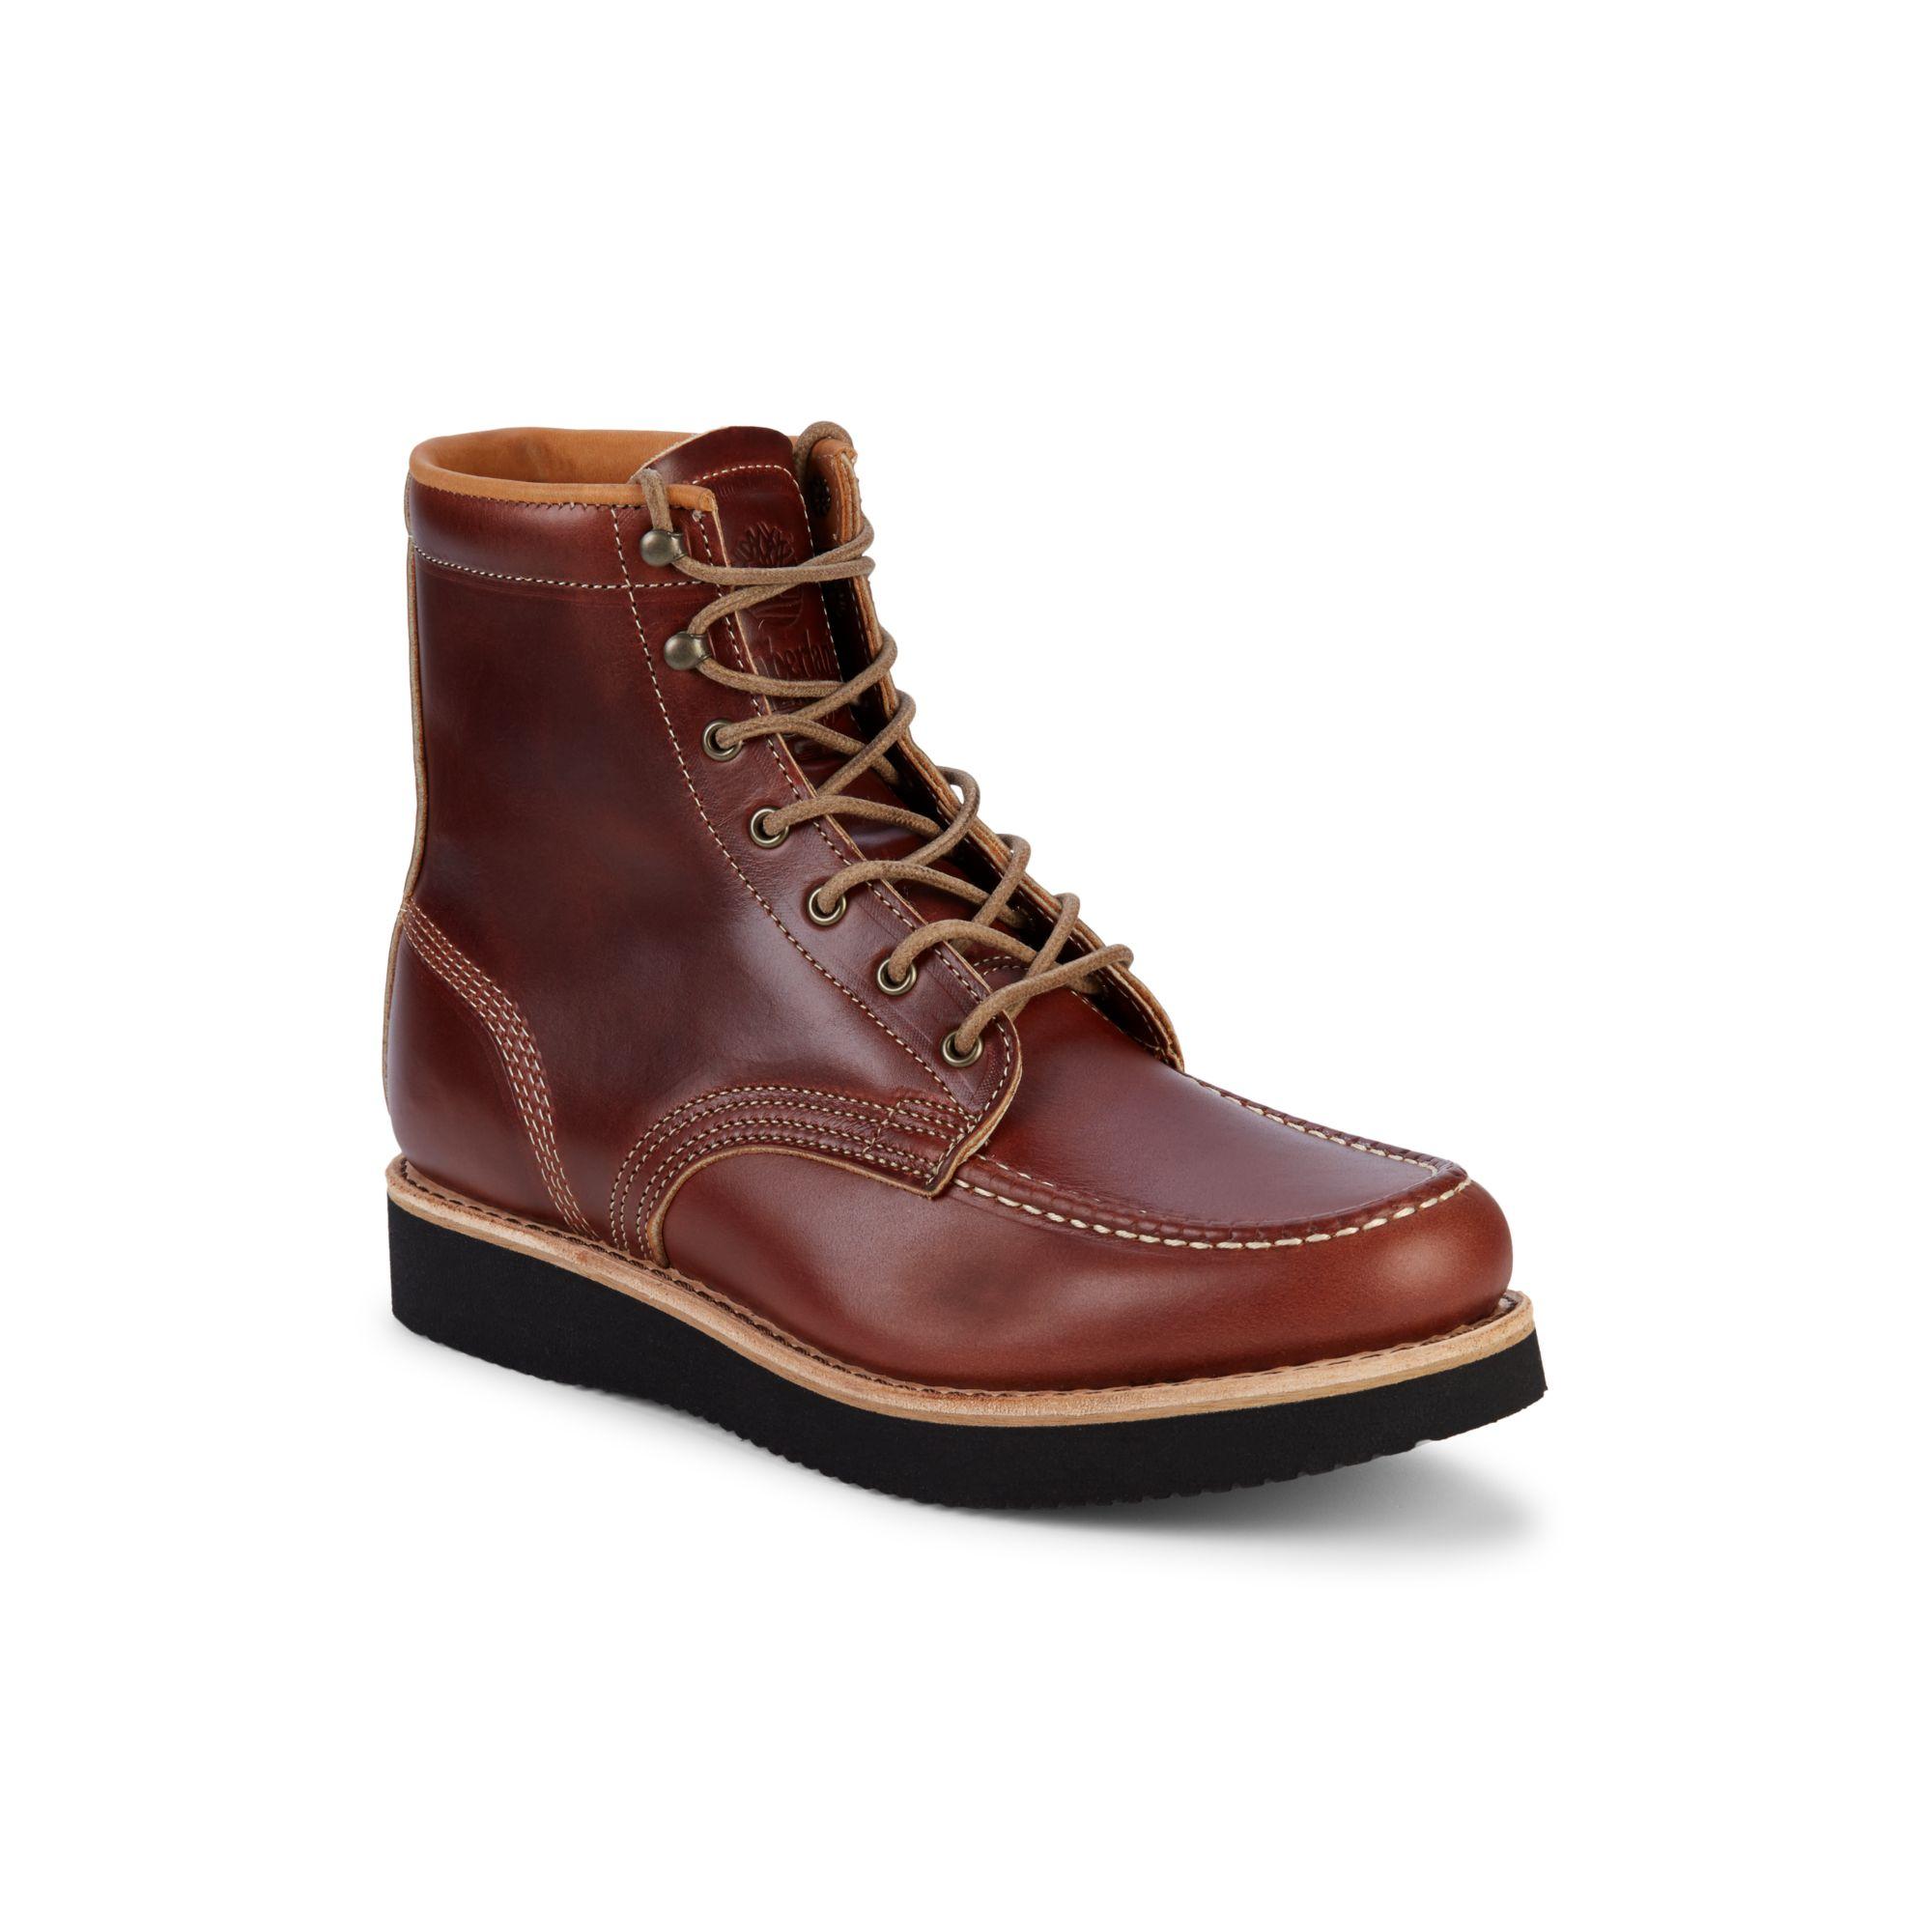 Timberland American Craft Moc-toe Leather Boots in Brown for Men - Lyst